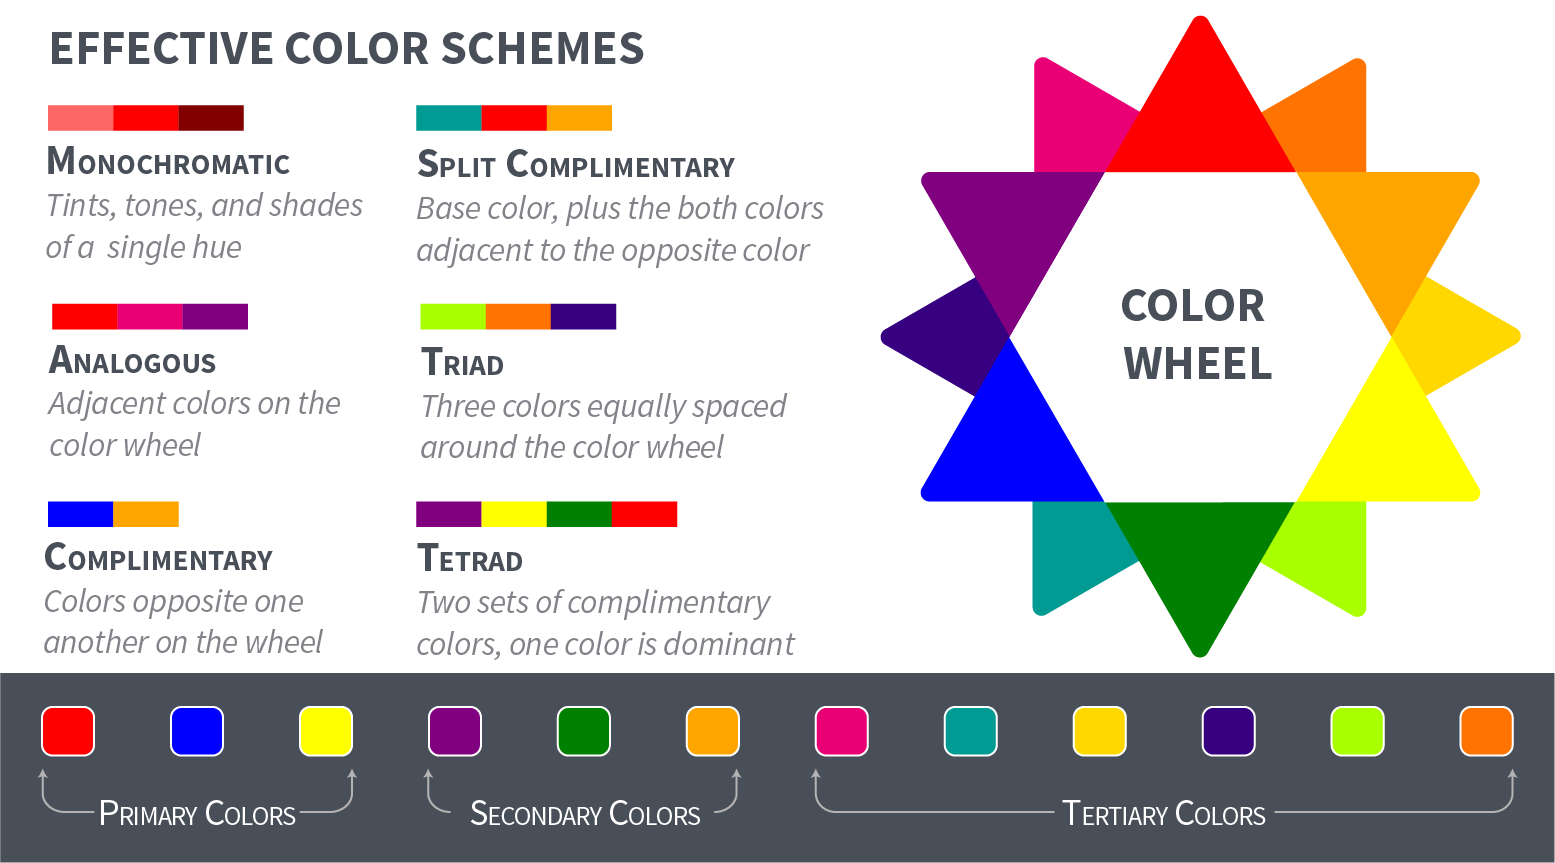 What are the secondary colors? An excellent chart showing the